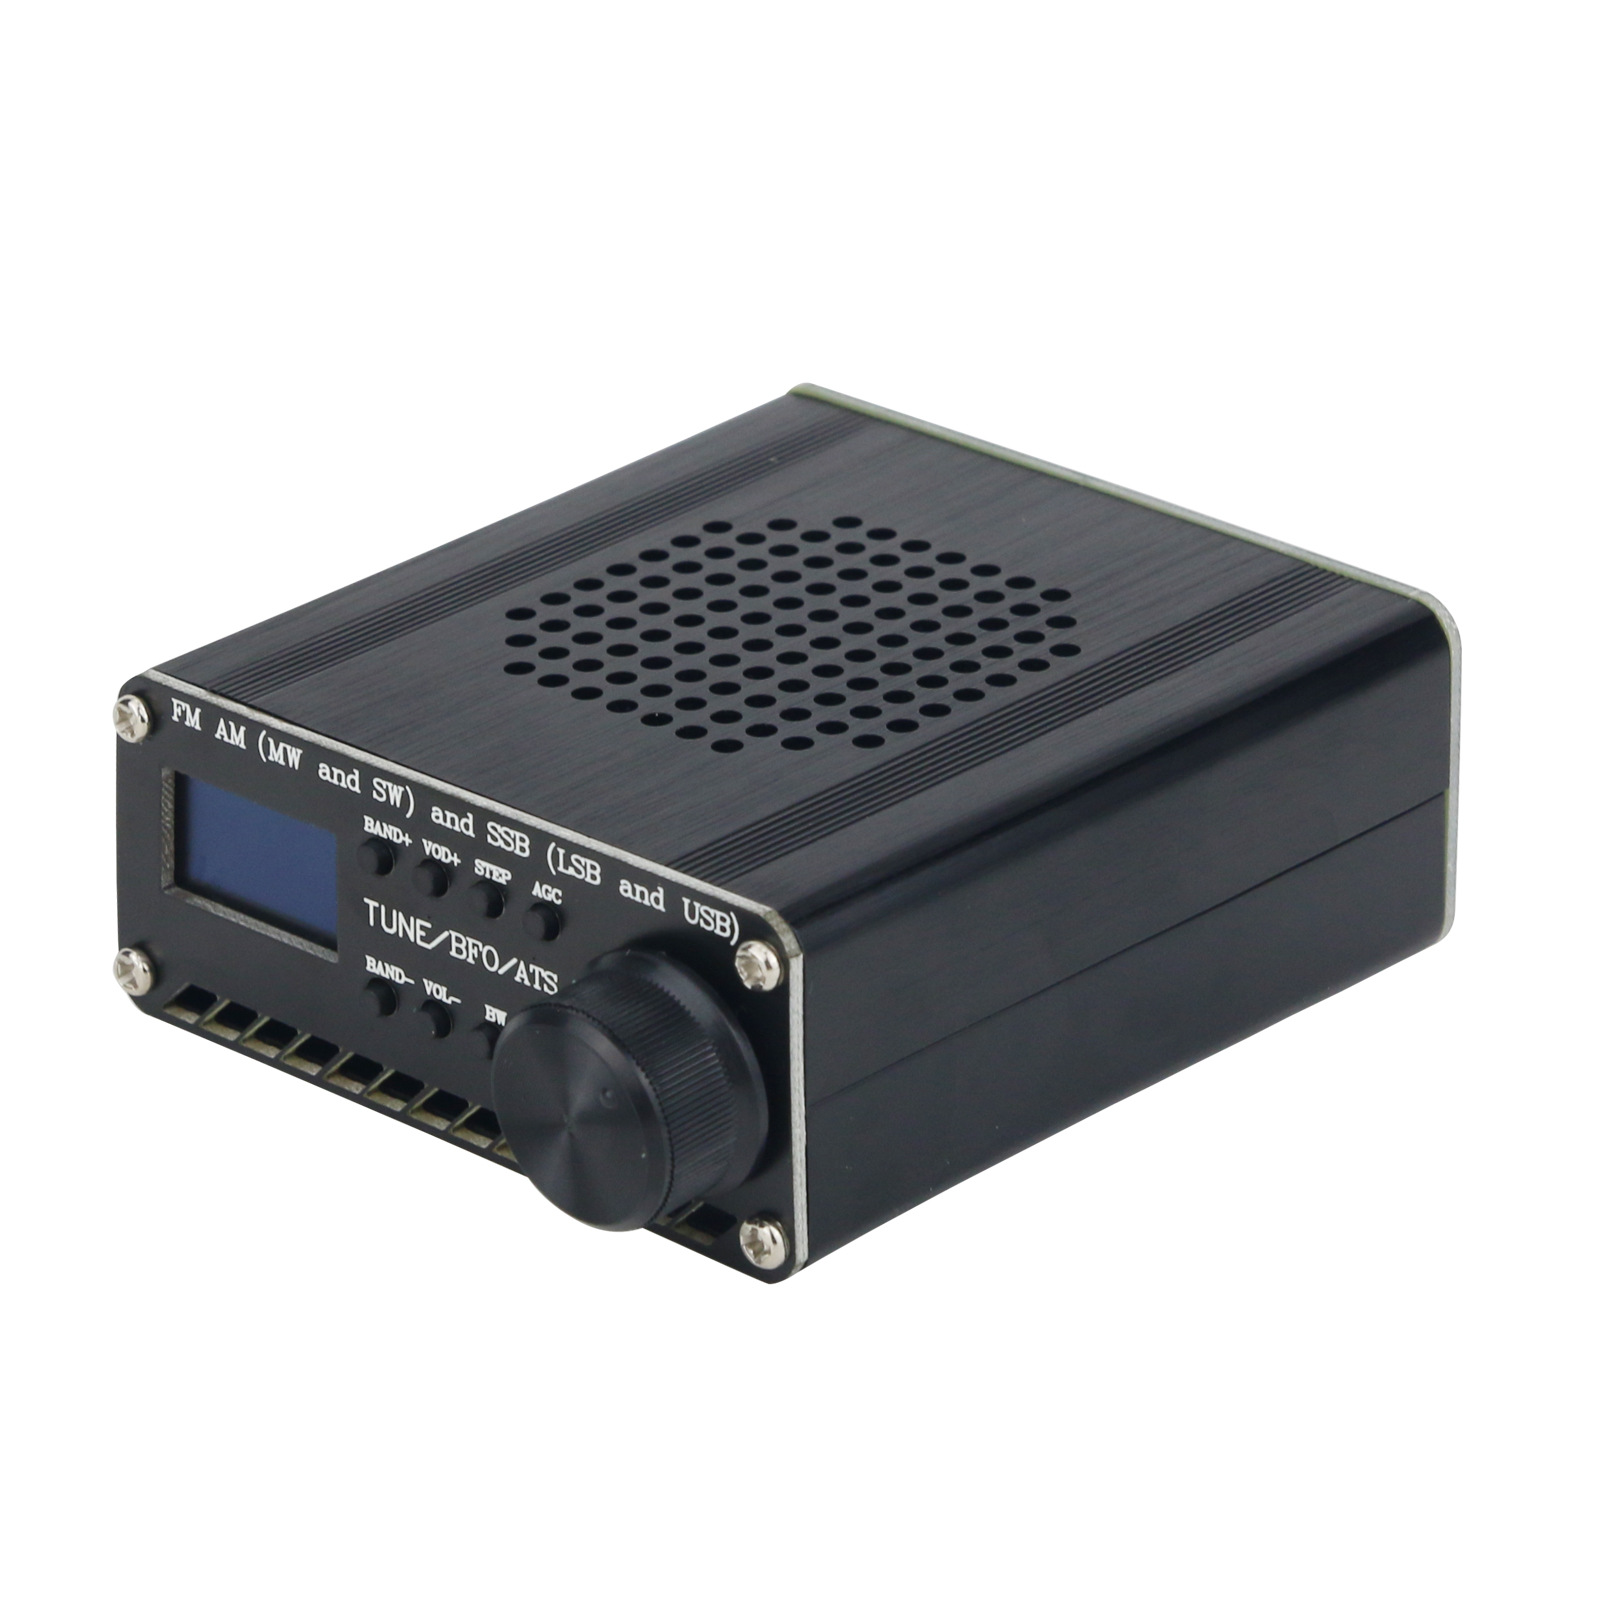 SI4732-All-Band-Radio-FM-AM-MW-And-SW-And-SSB-LSB-And-USB-With-Antenna-Lithium-Battery-Speaker-1816774-1